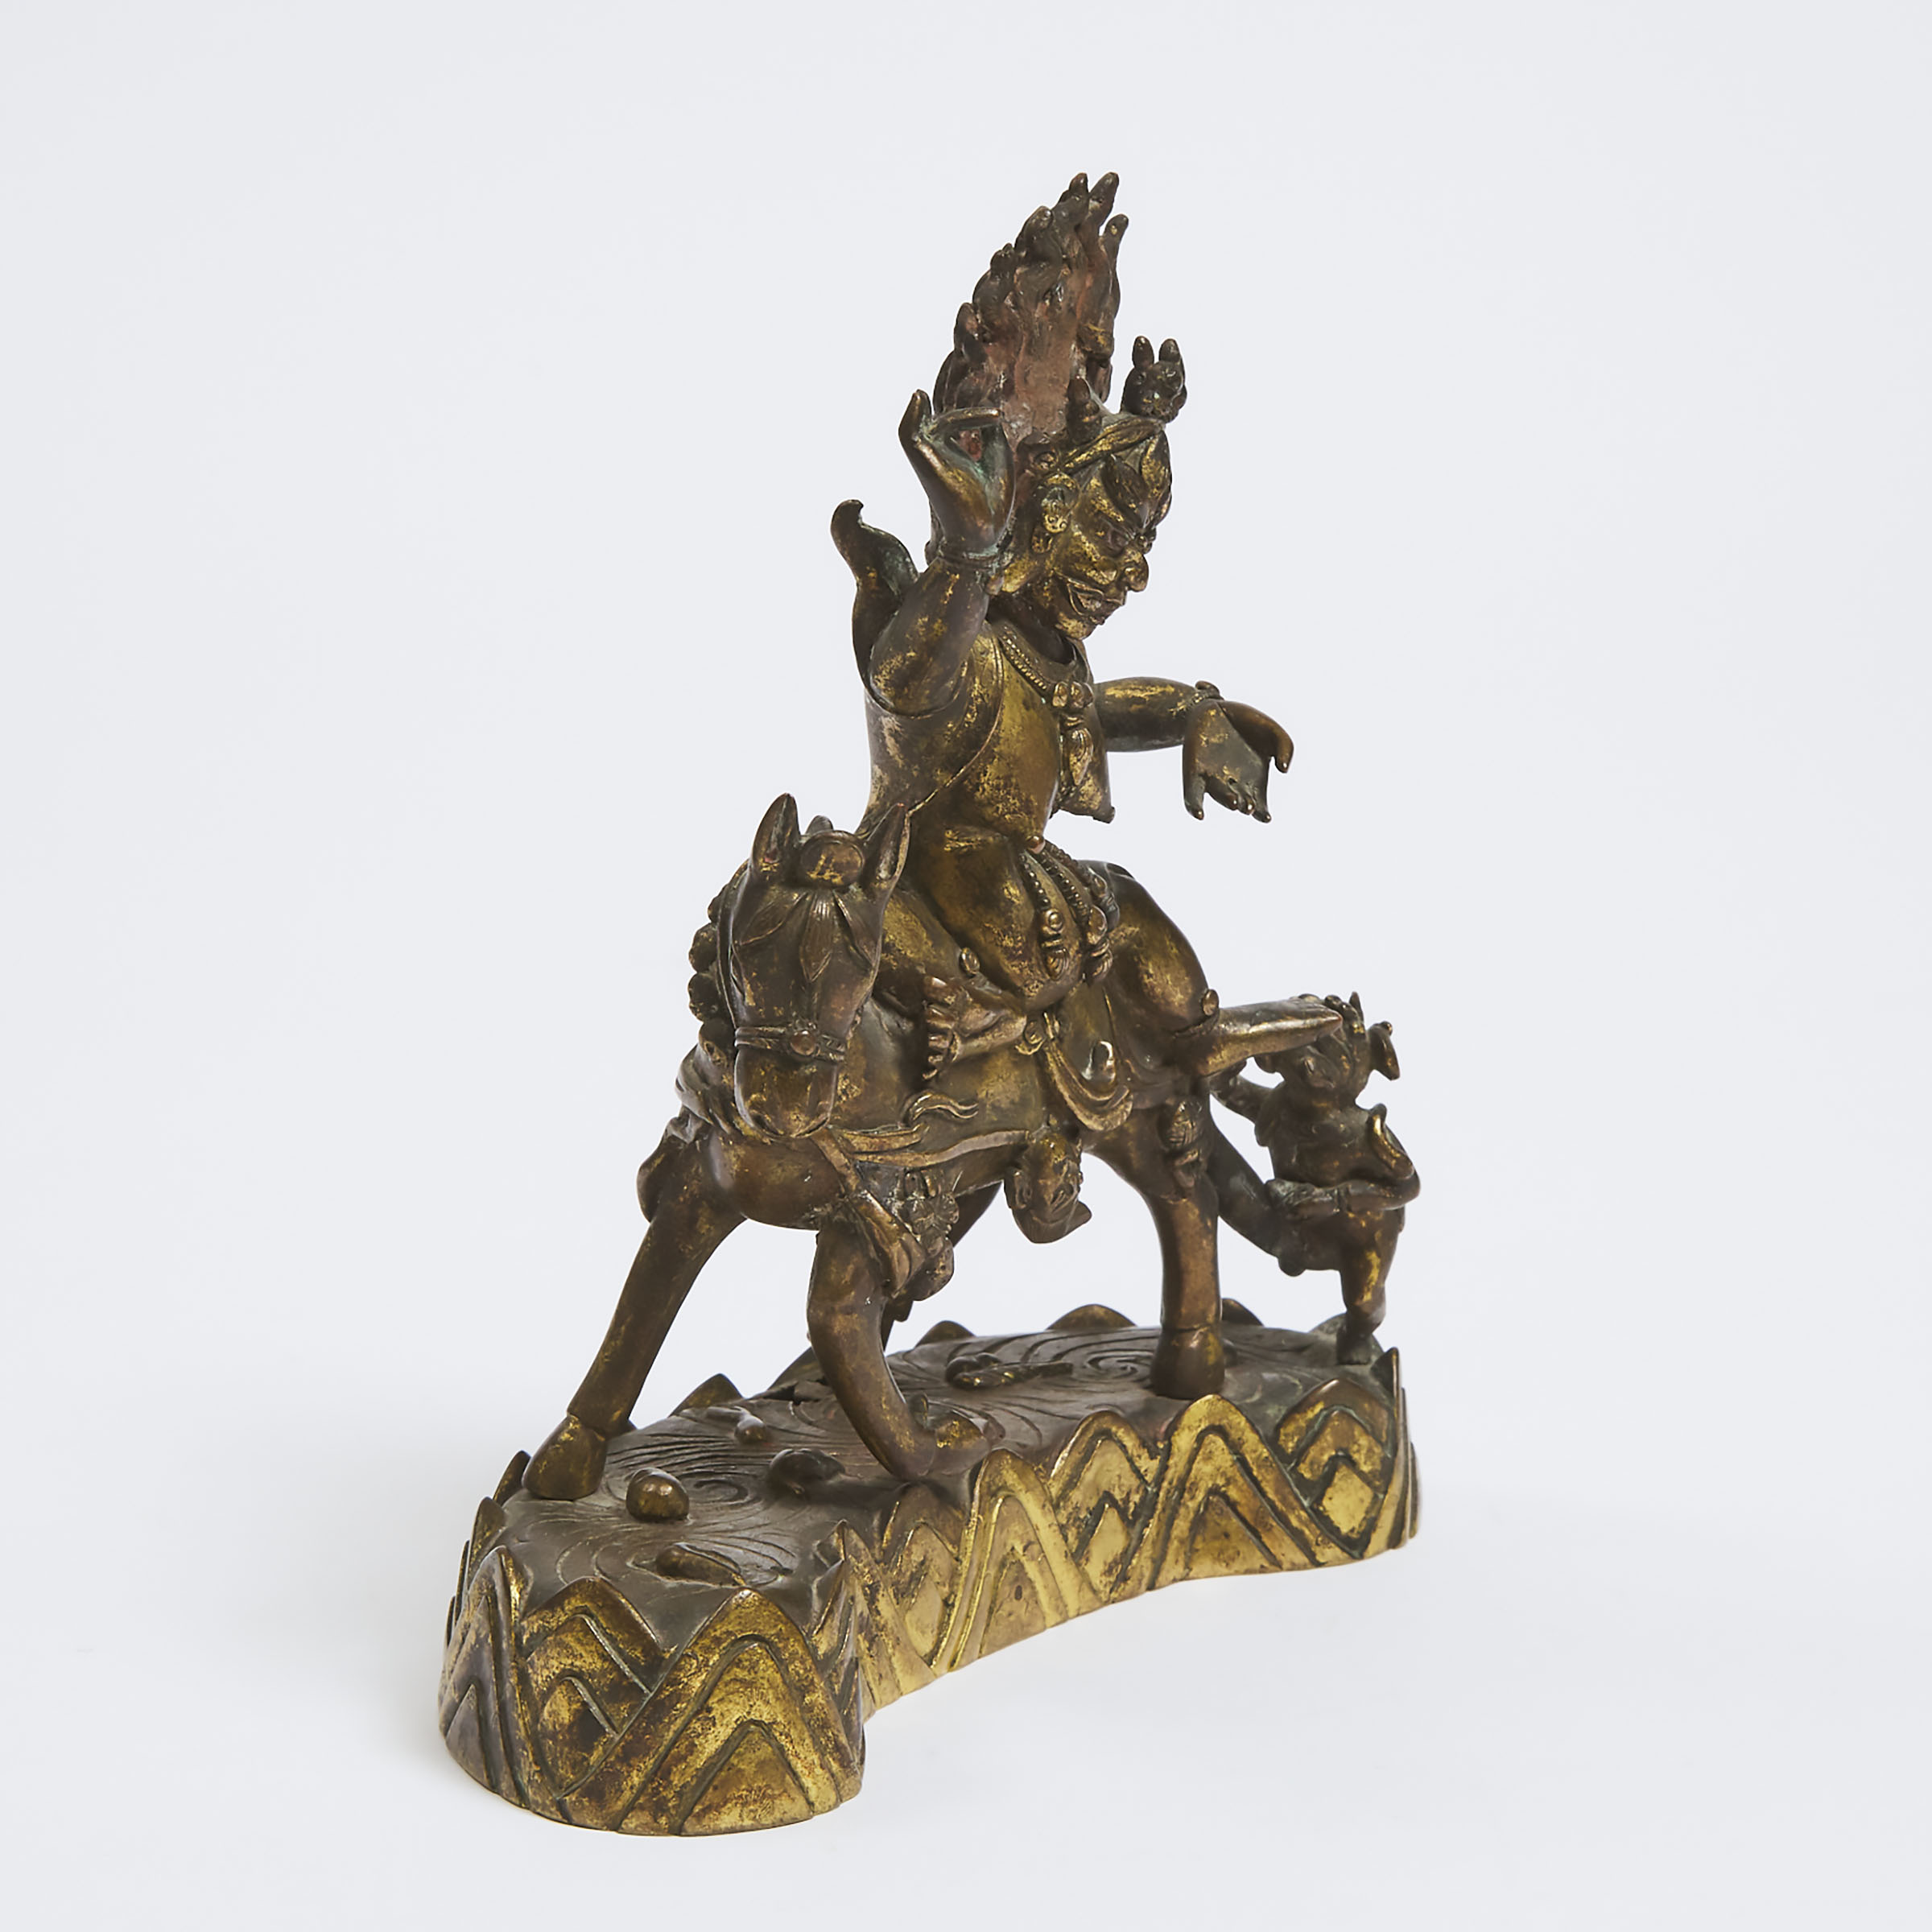 A Gilt Bronze Figure of Palden Lhamo with Simhavaktra, 18th Century